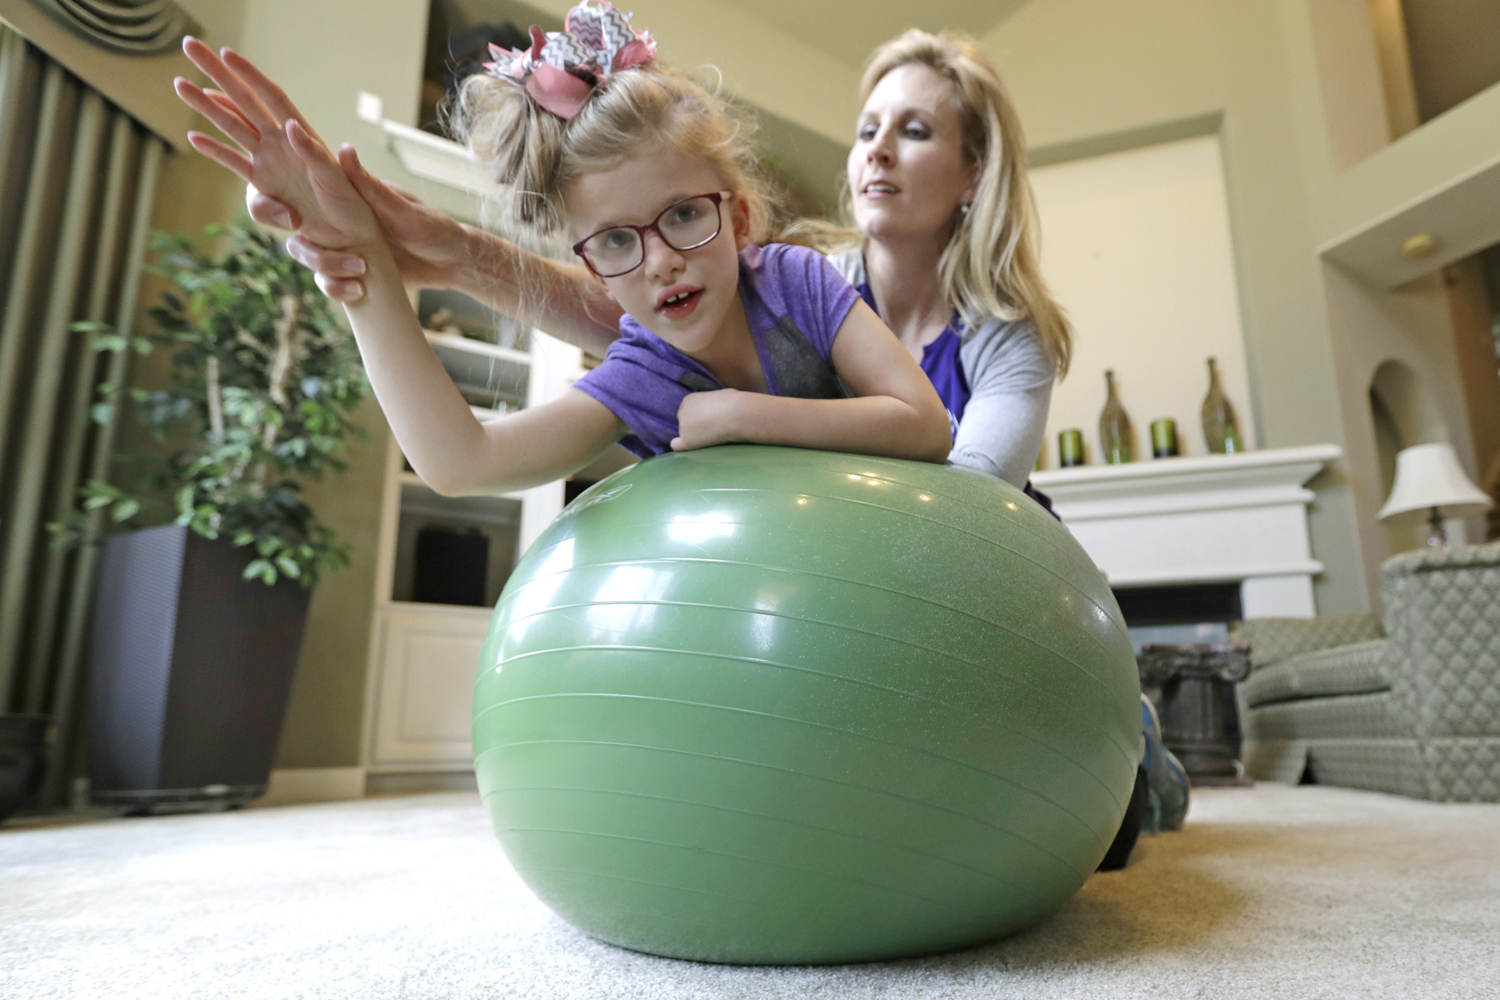 Stacey English, right, works on balance and core strength with her 7-year-old daughter, Addison, in Houston on Friday, June 23, 2017. Texas children with special needs like Addison have lost critical services since the state implemented $350 million in Medicaid cuts to speech, occupational, and physical therapy in December. (David J. Phillip/AP)